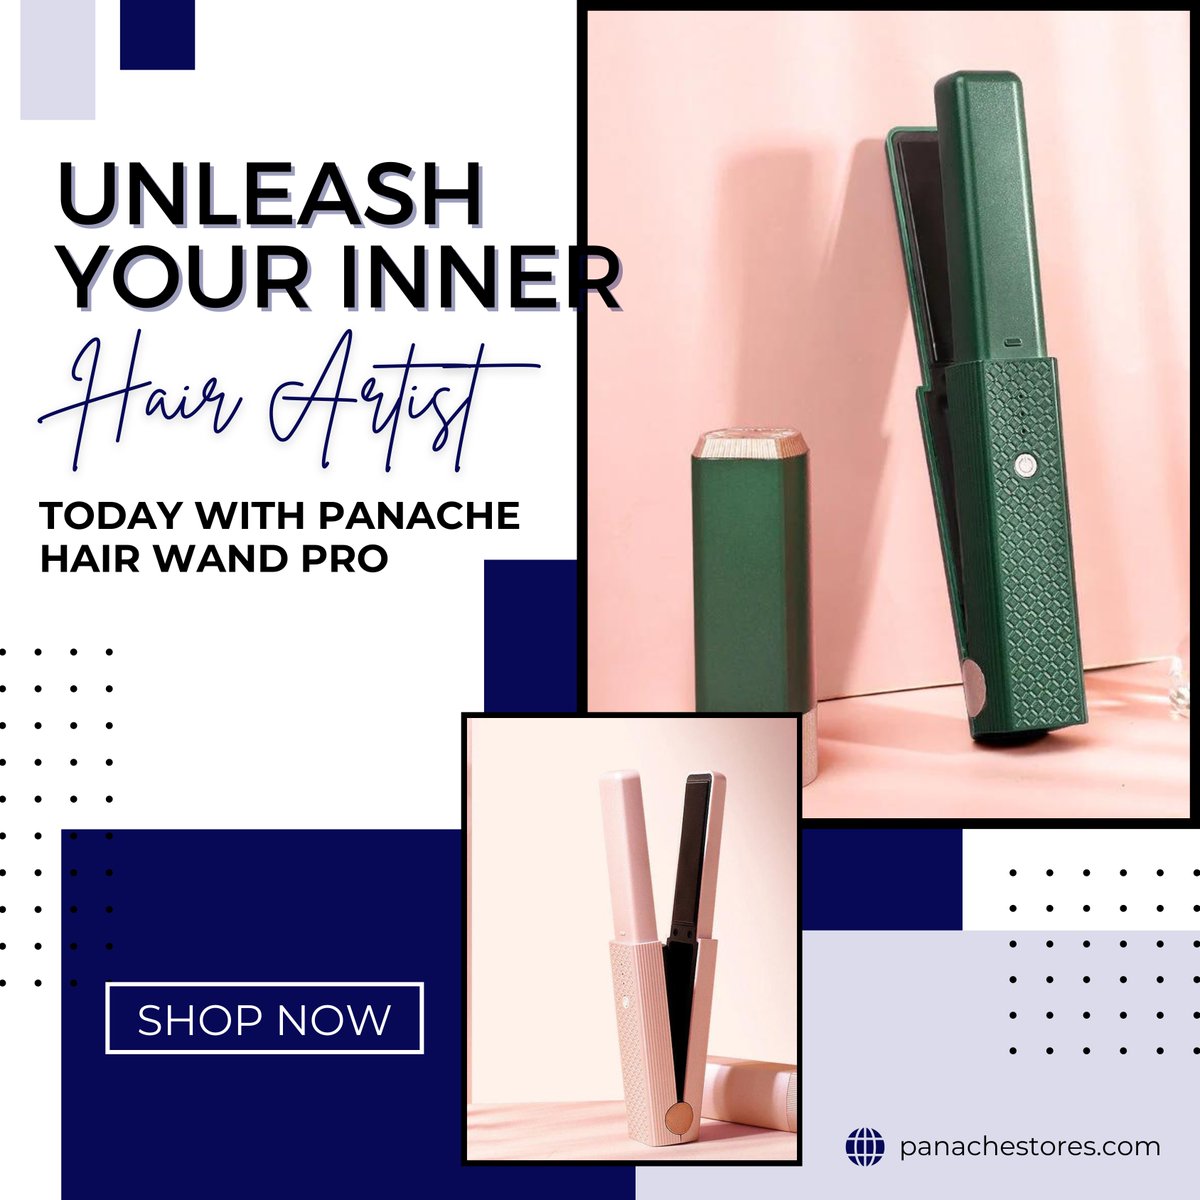 This professional-grade hair styling tool is designed for precision and ease of use, ensuring you can create stunning hairstyles effortlessly.

#hairwandpro #hairstyling #precision #easeofuse #advancedtechnology #customizable #temperaturesettings #versatility #haircare